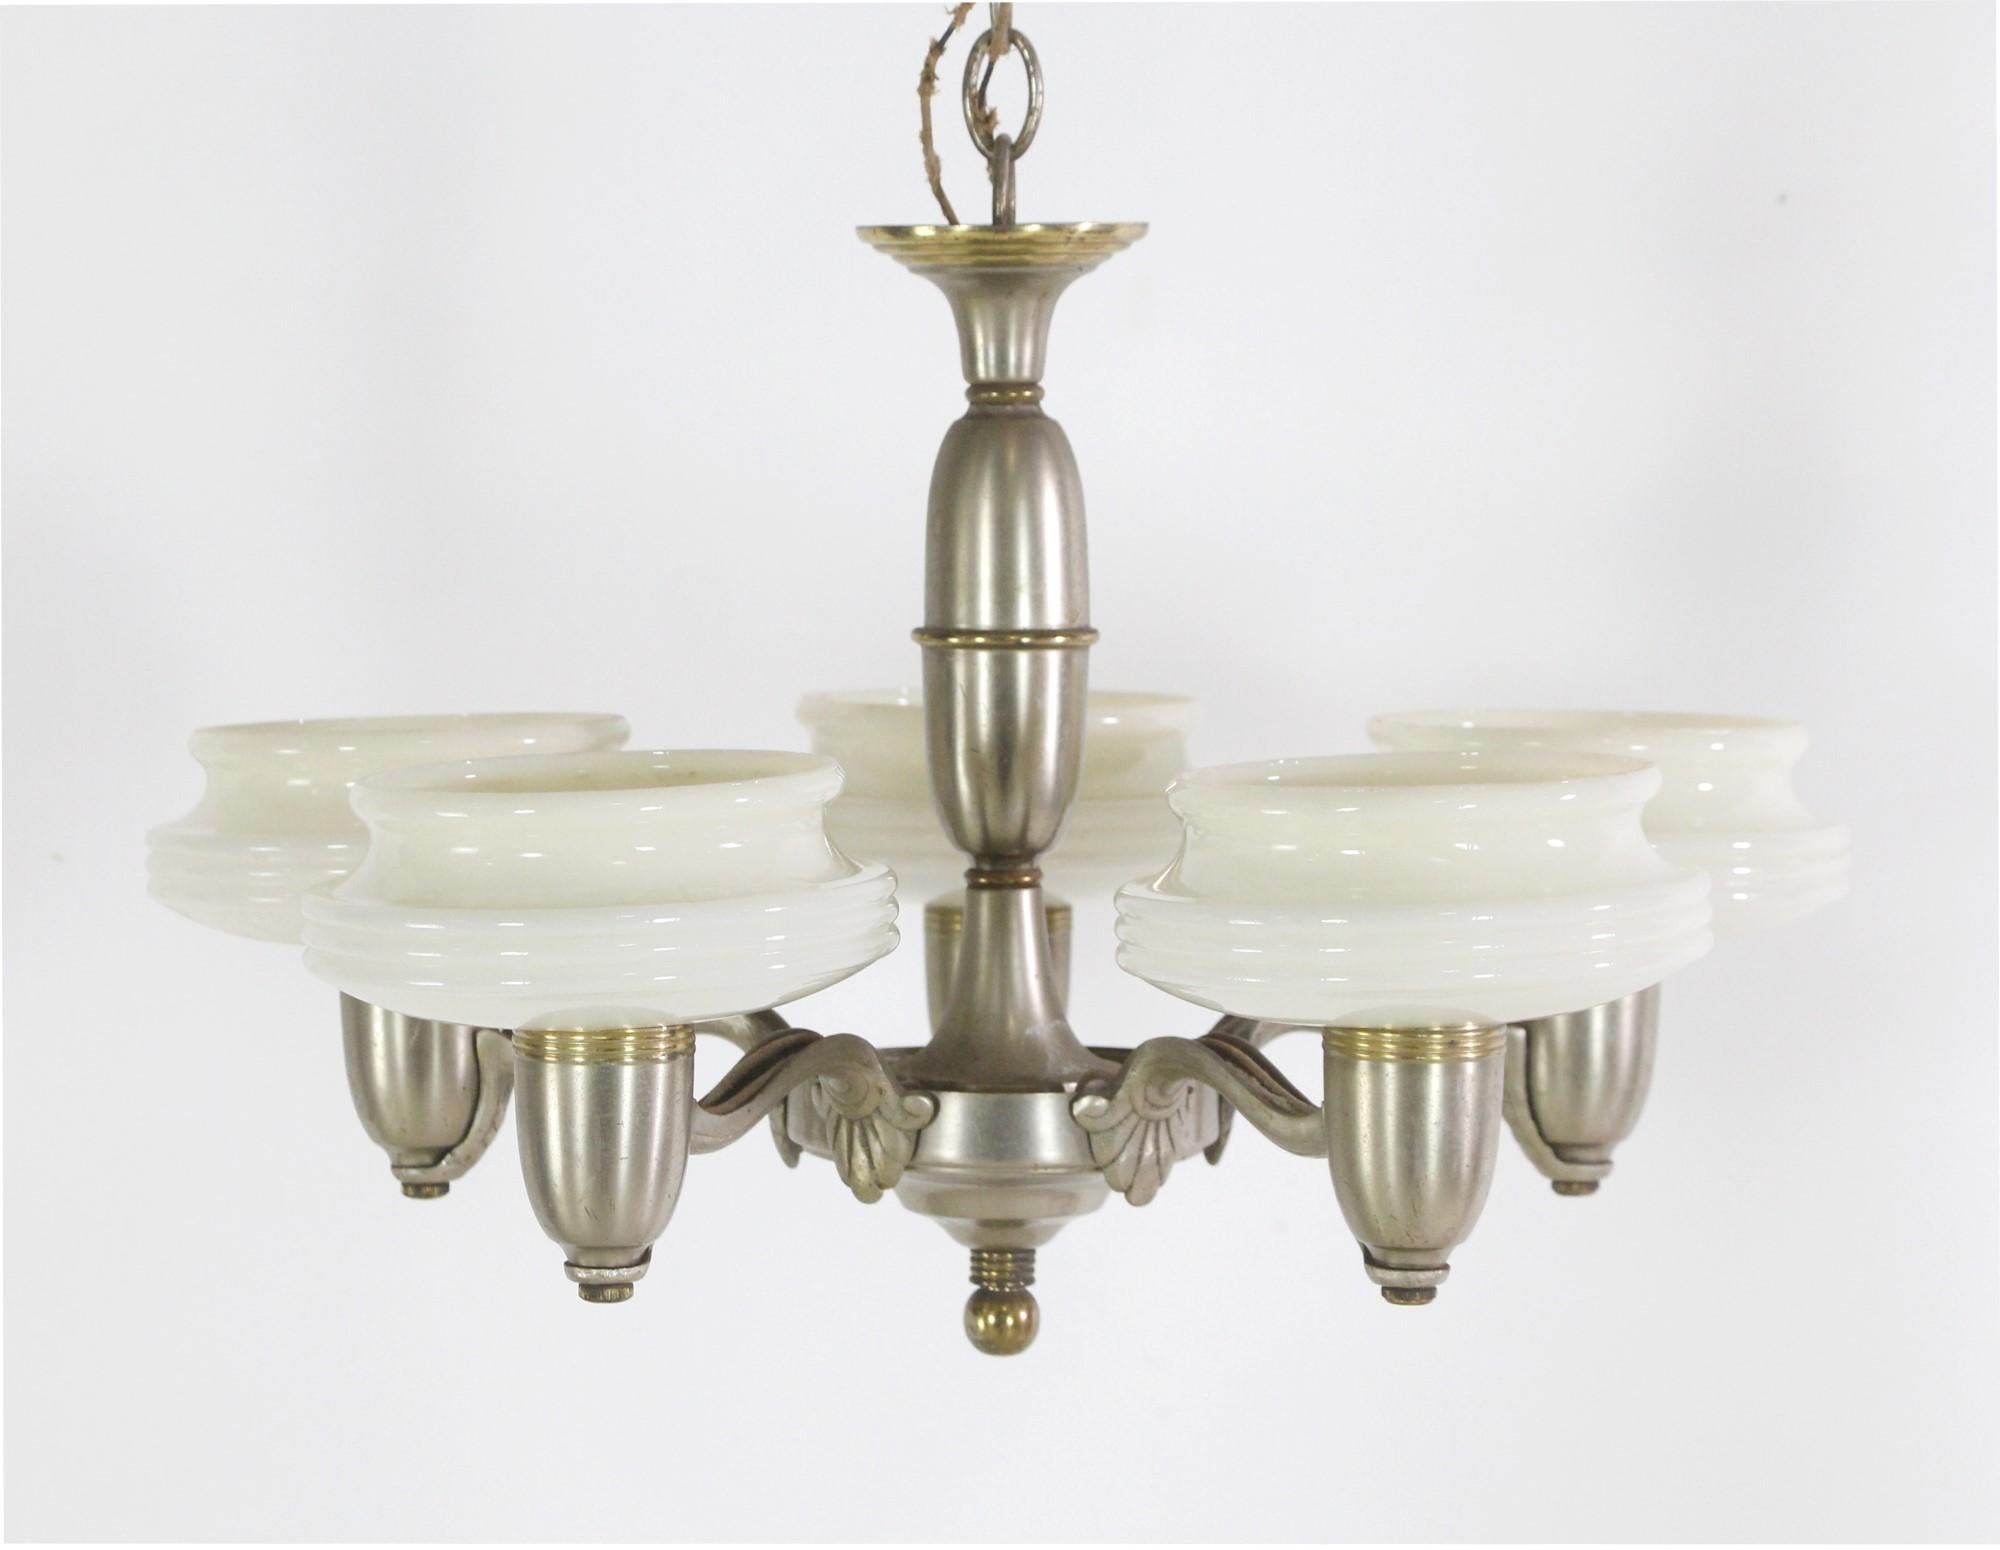 American 1930s Art Deco Nickel Brass 5 Arm Chandelier White Glass Shades For Sale